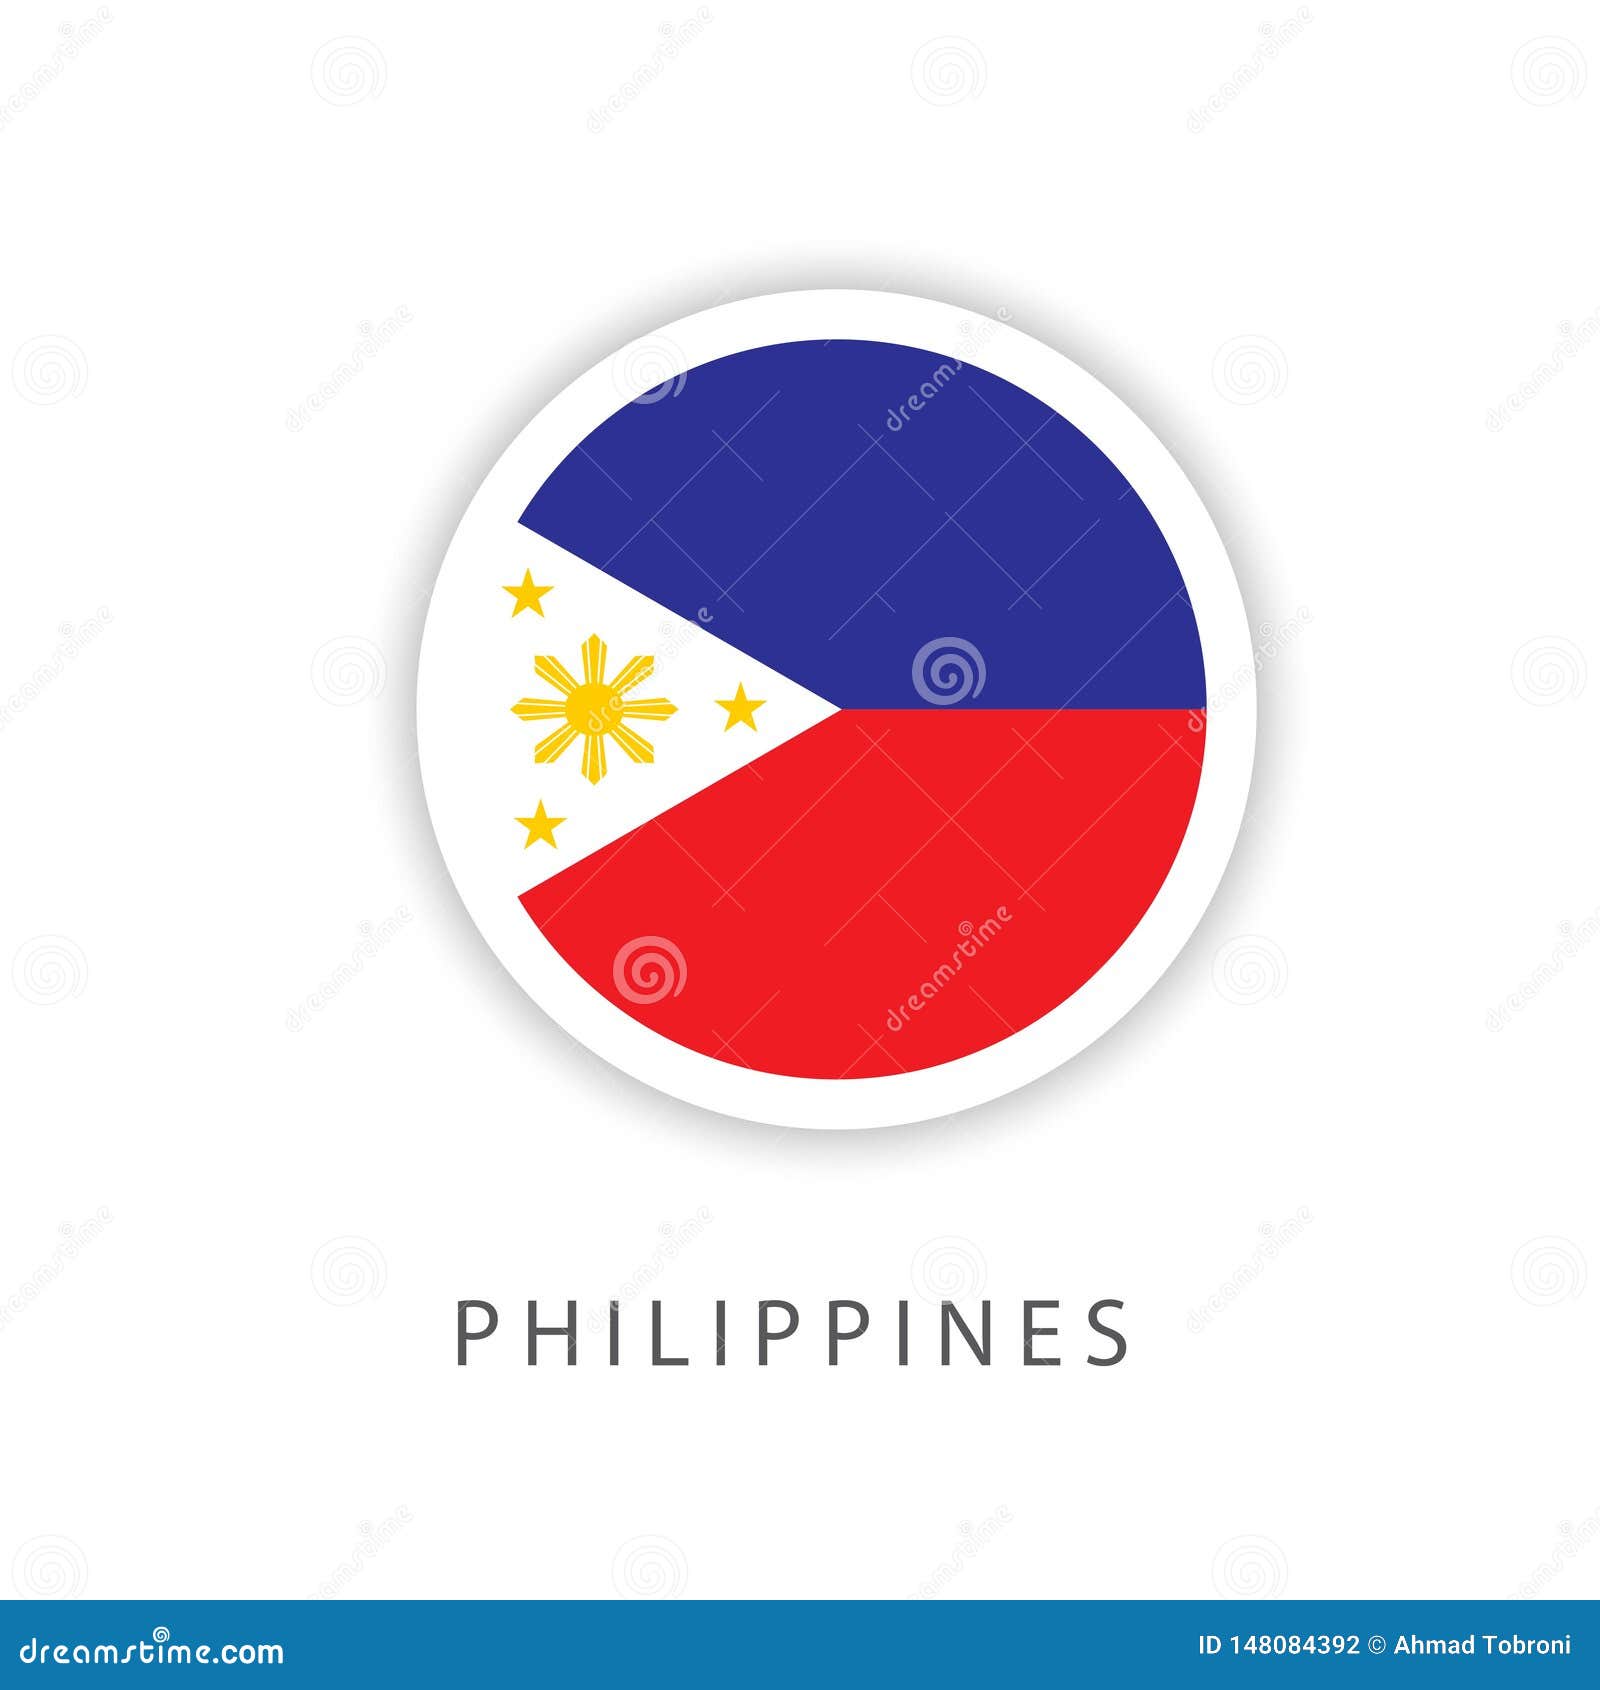 Philippine Flag Button Stock Illustrations 74 Philippine Flag Button Stock Illustrations Vectors Clipart Dreamstime